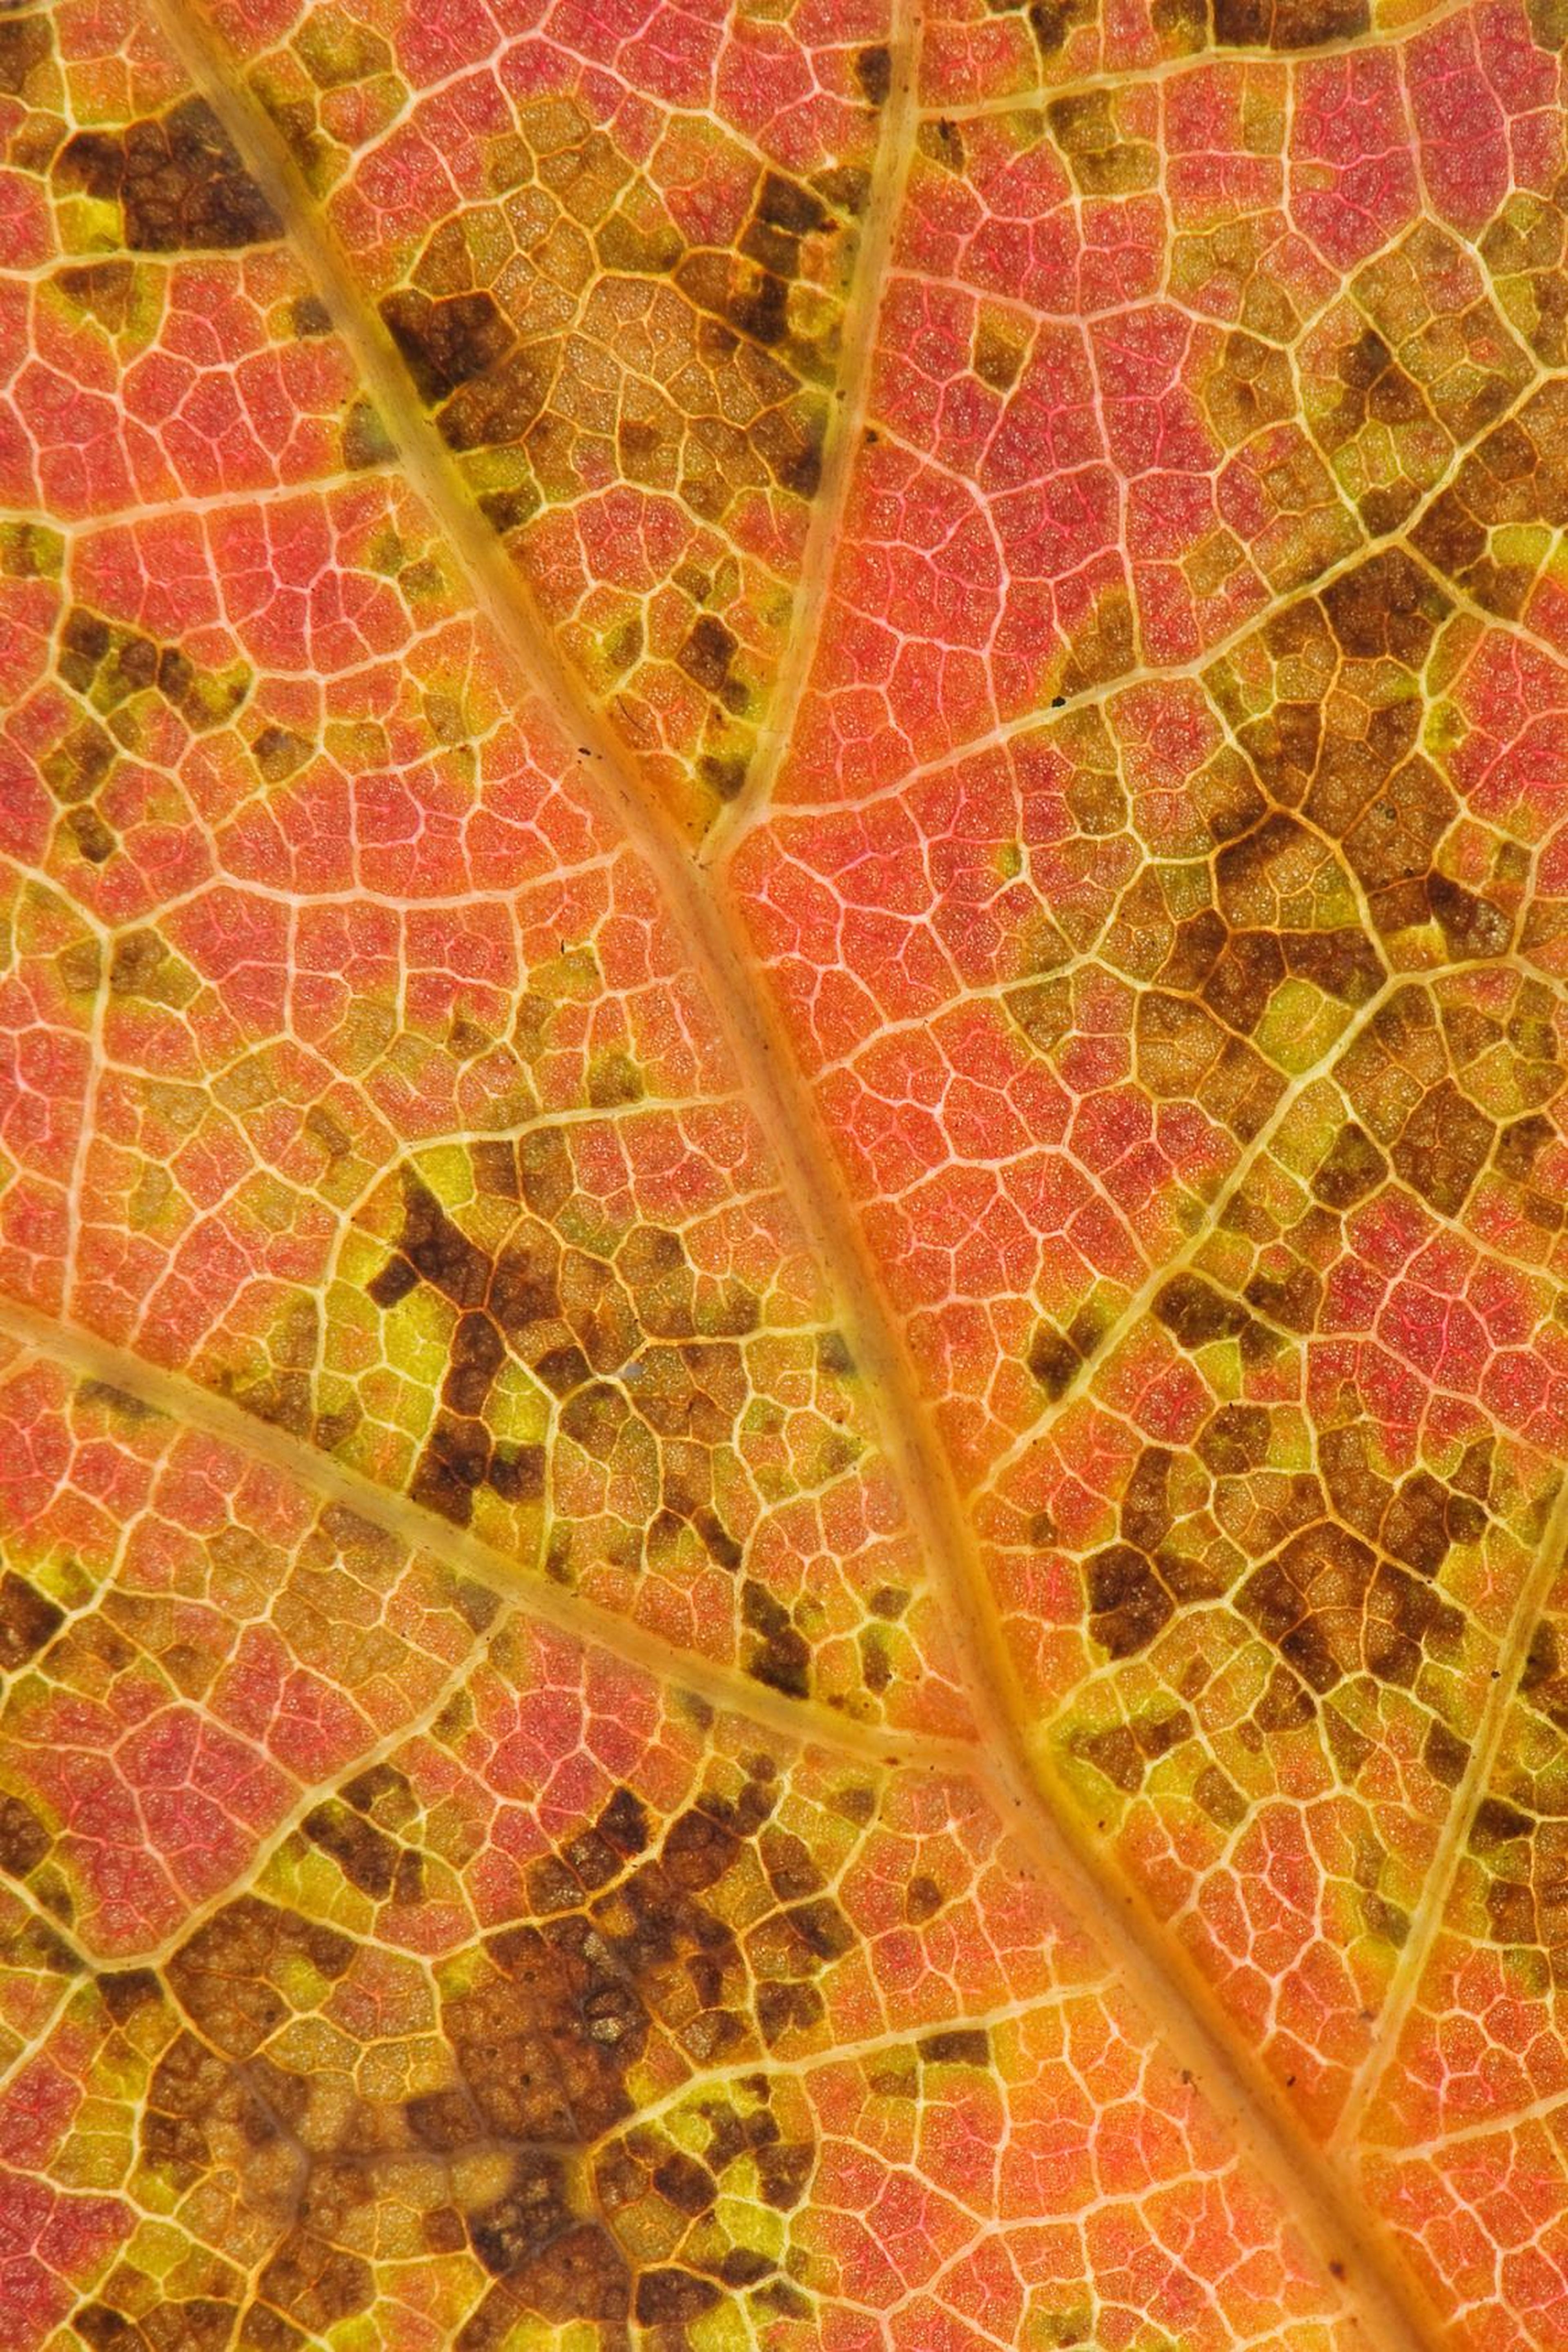 The underside of a decaying northern red oak leaf.